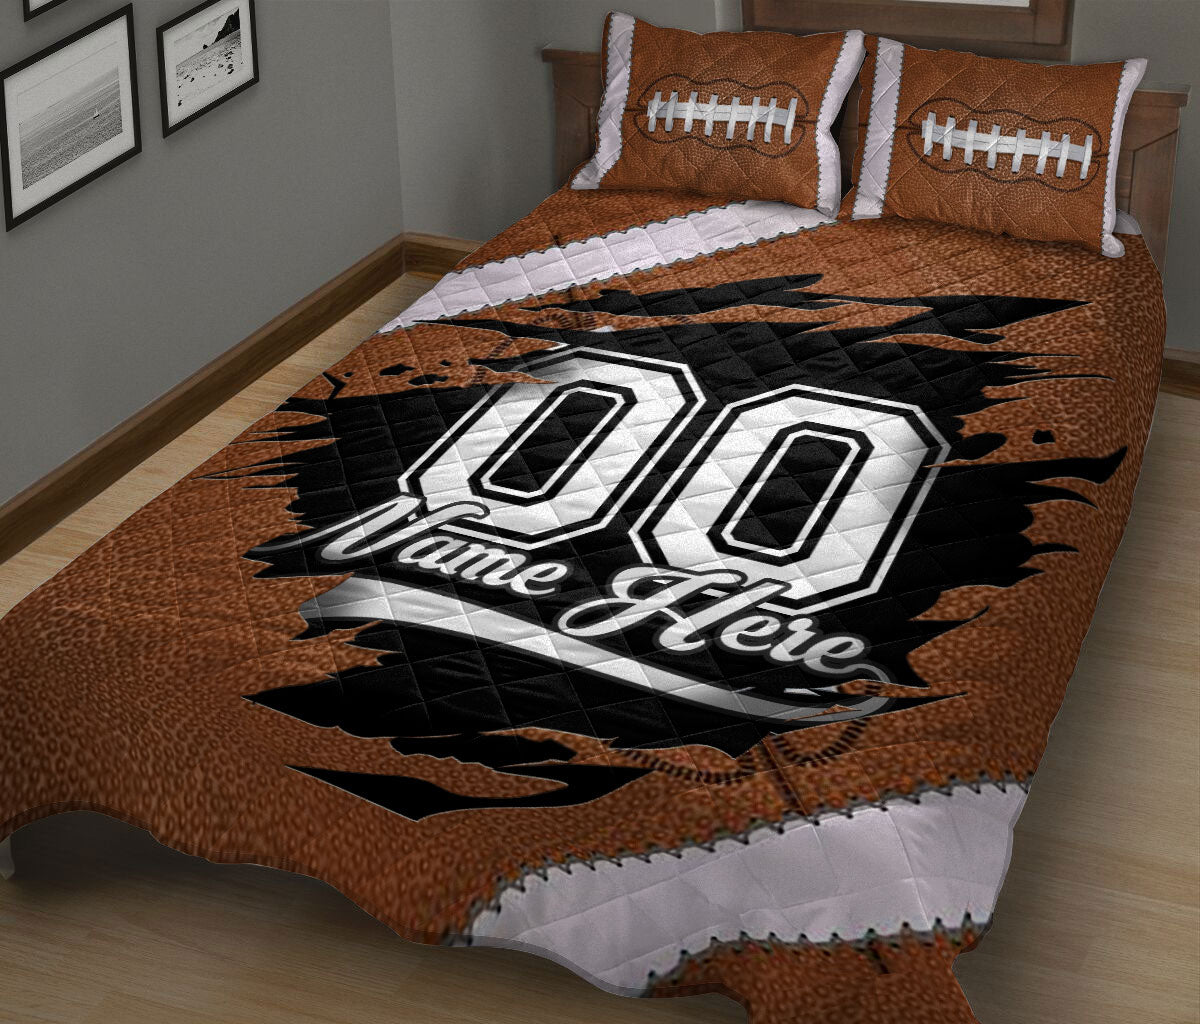 Ohaprints-Quilt-Bed-Set-Pillowcase-Football-Ball-Pattern-Gift-For-Sports-Lover-Custom-Personalized-Name-Number-Blanket-Bedspread-Bedding-1676-King (90'' x 100'')